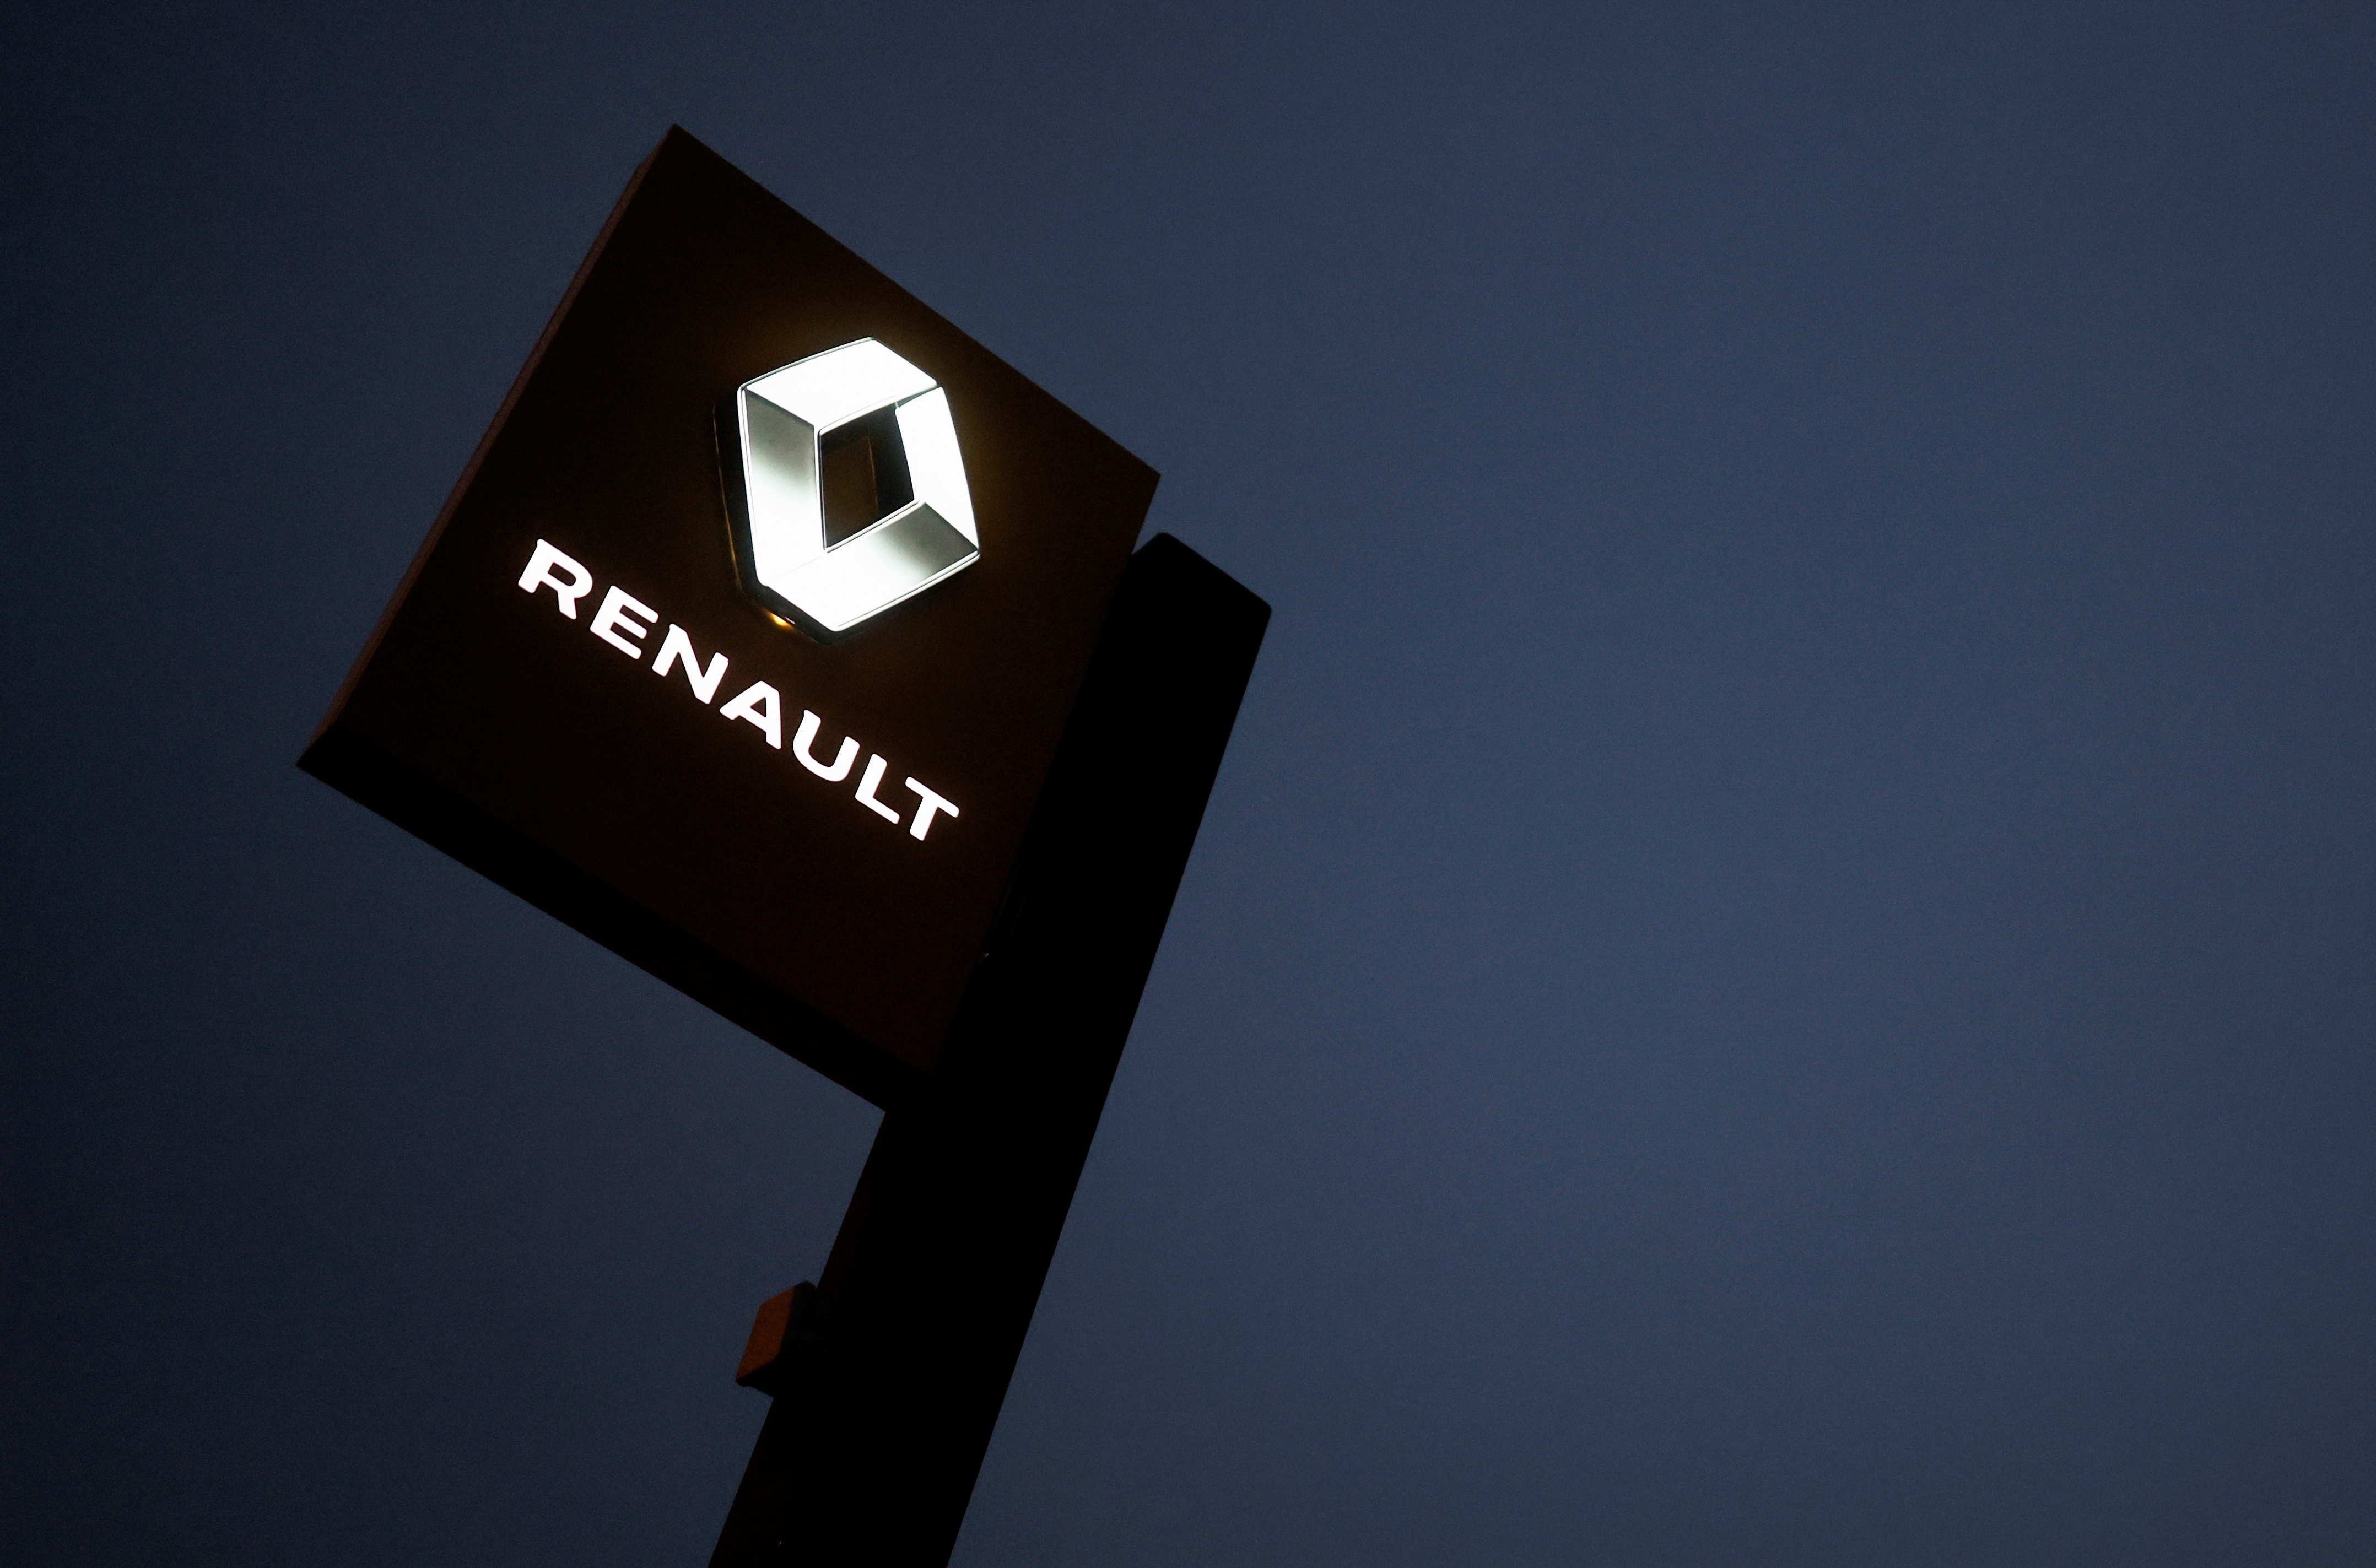 The logo of Renault carmaker is pictured at a dealership in Vertou